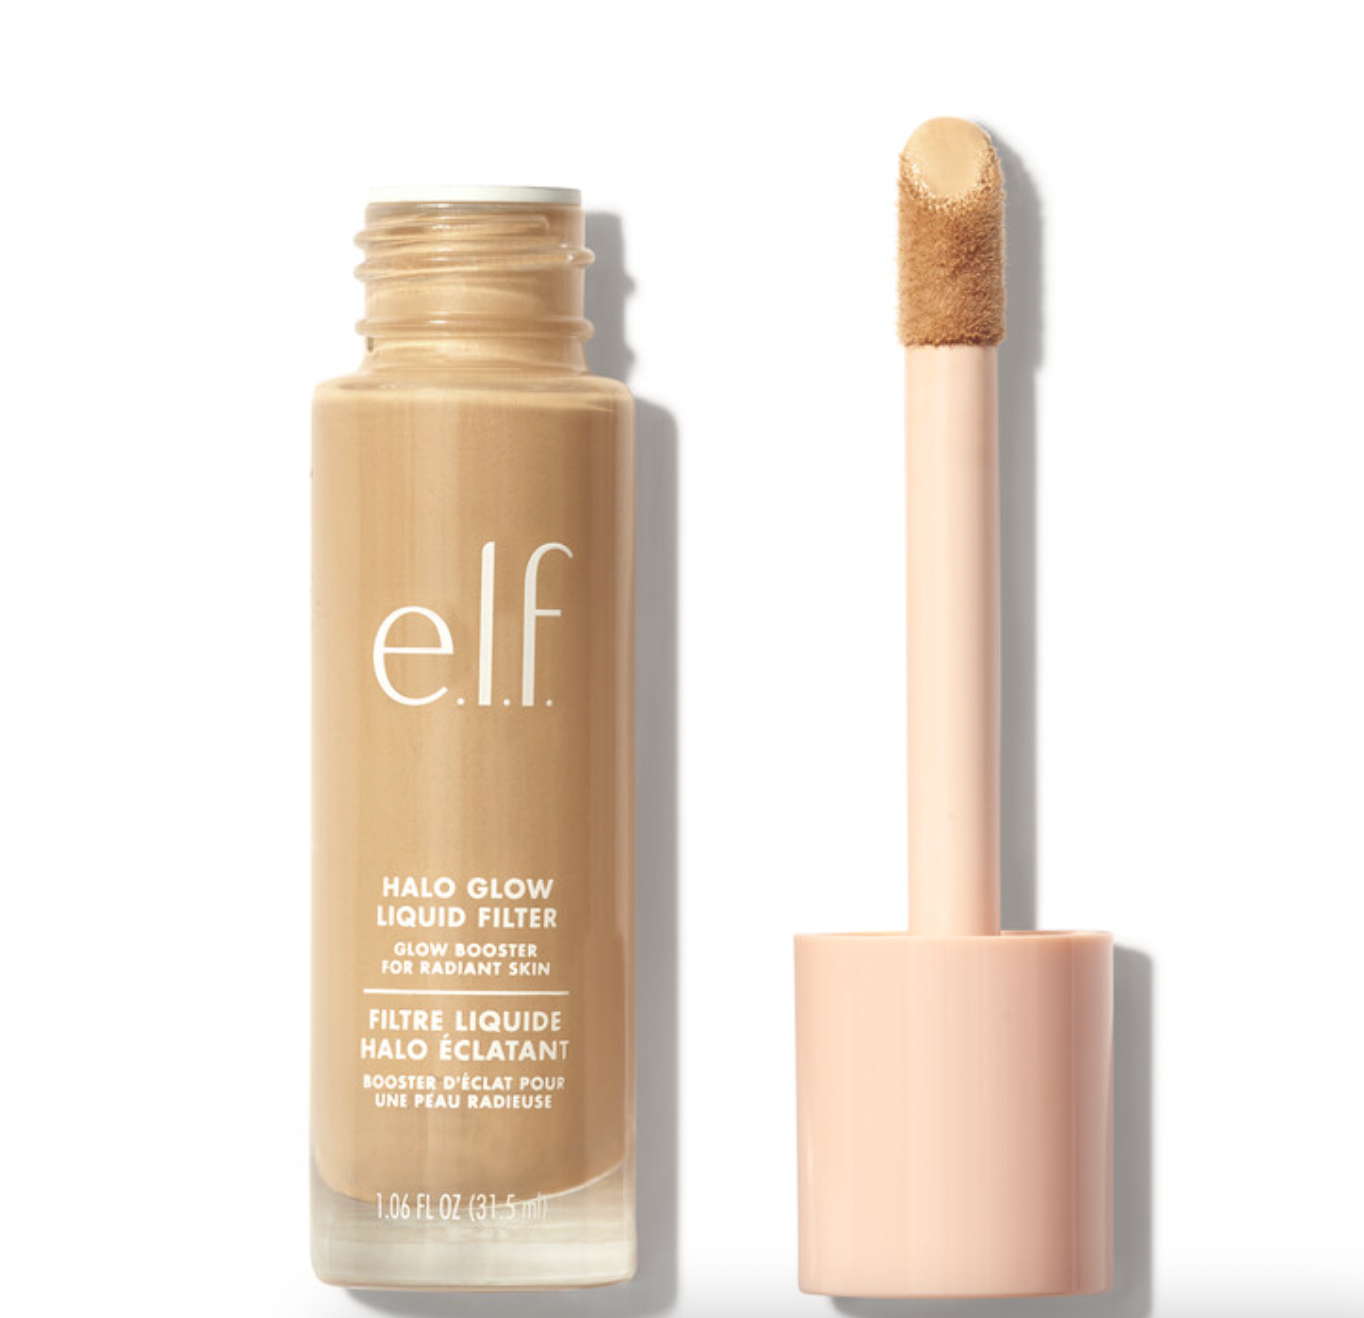 I Tried Almost Everything From E.l.f. Cosmetics & Here’s What I’d Actually Buy